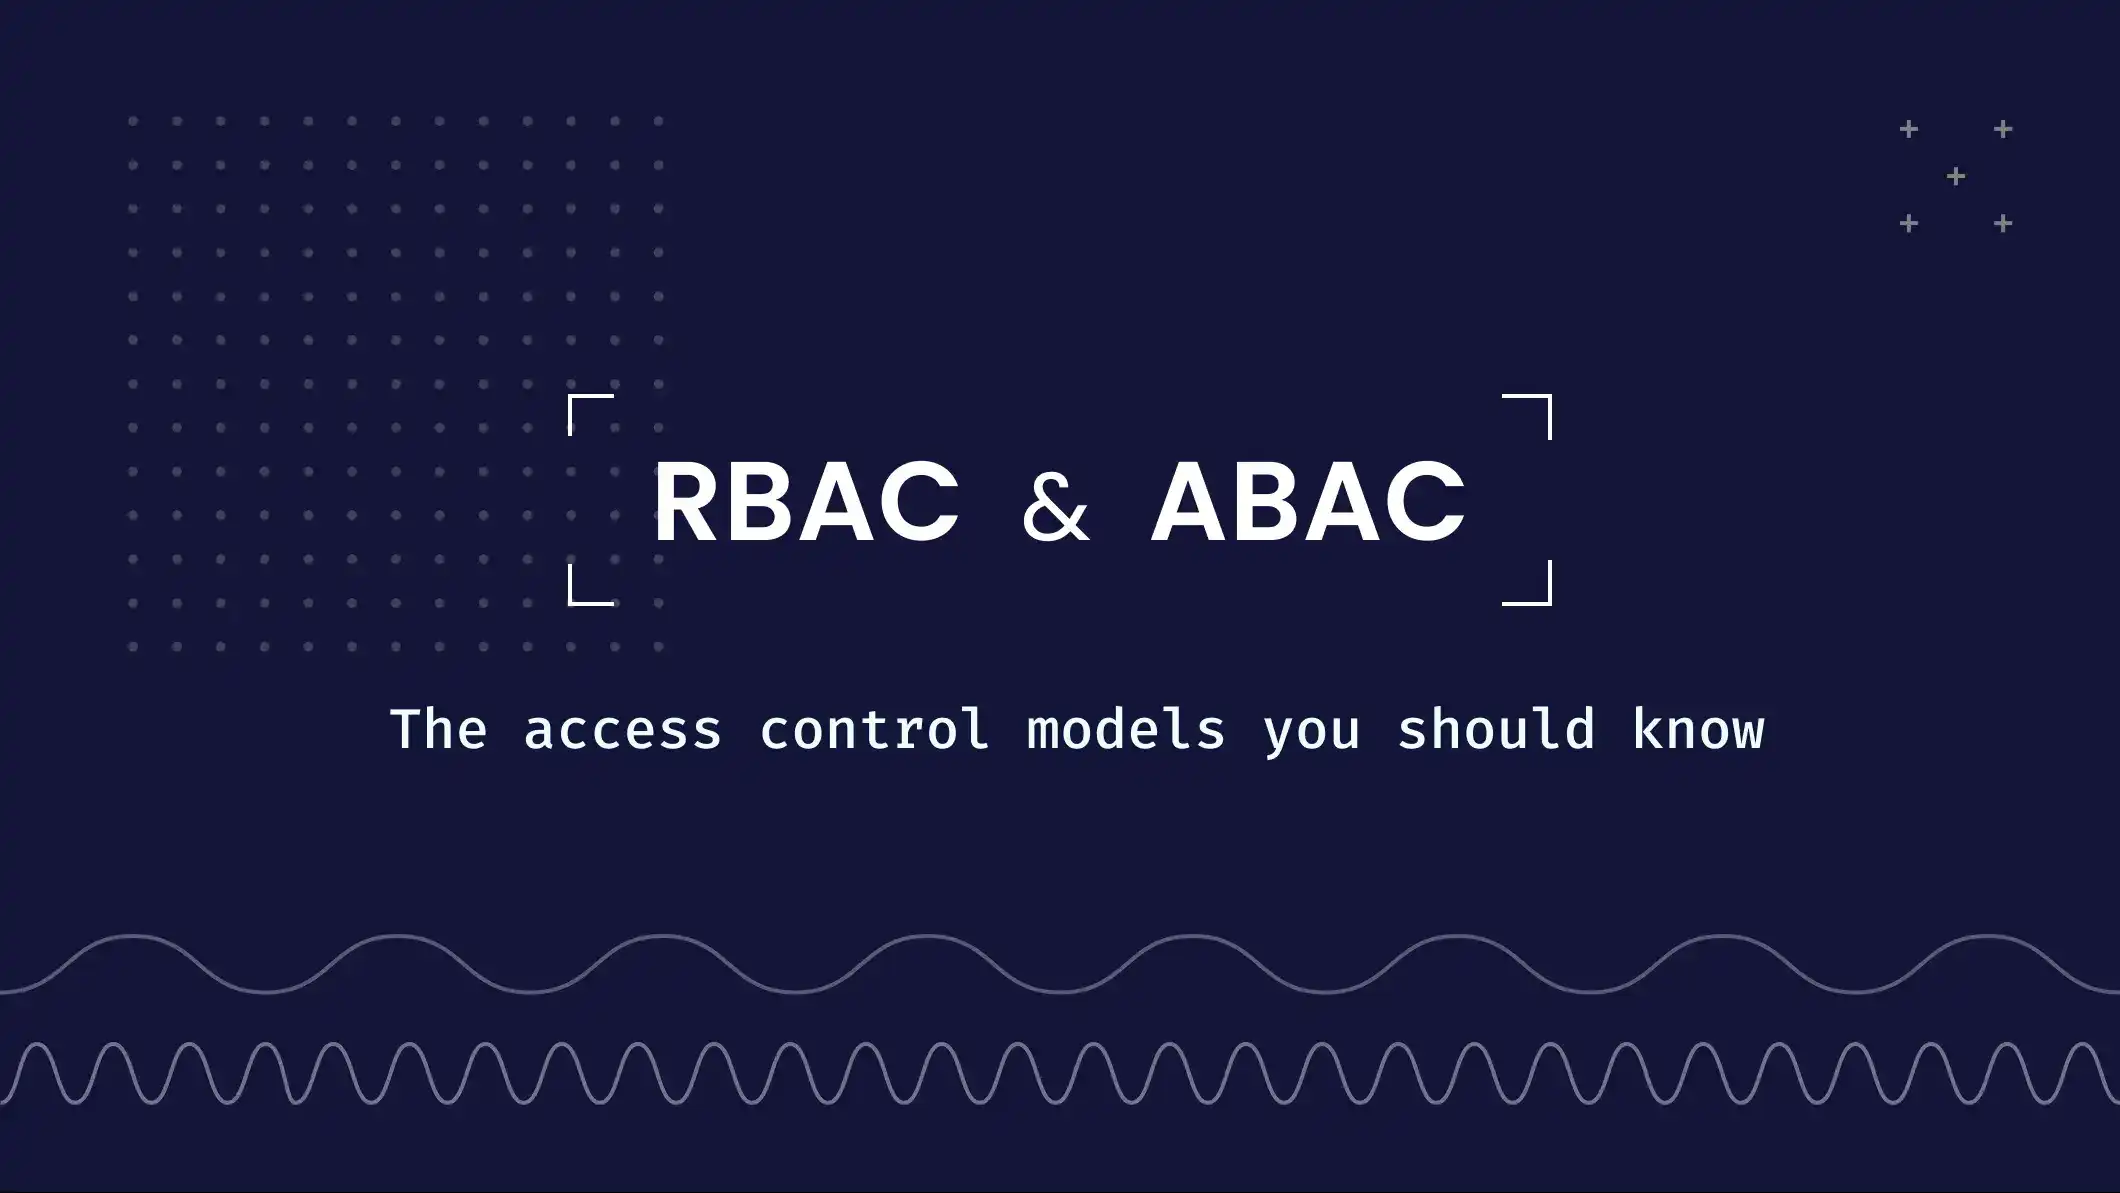 RBAC and ABAC: The access control models you should know